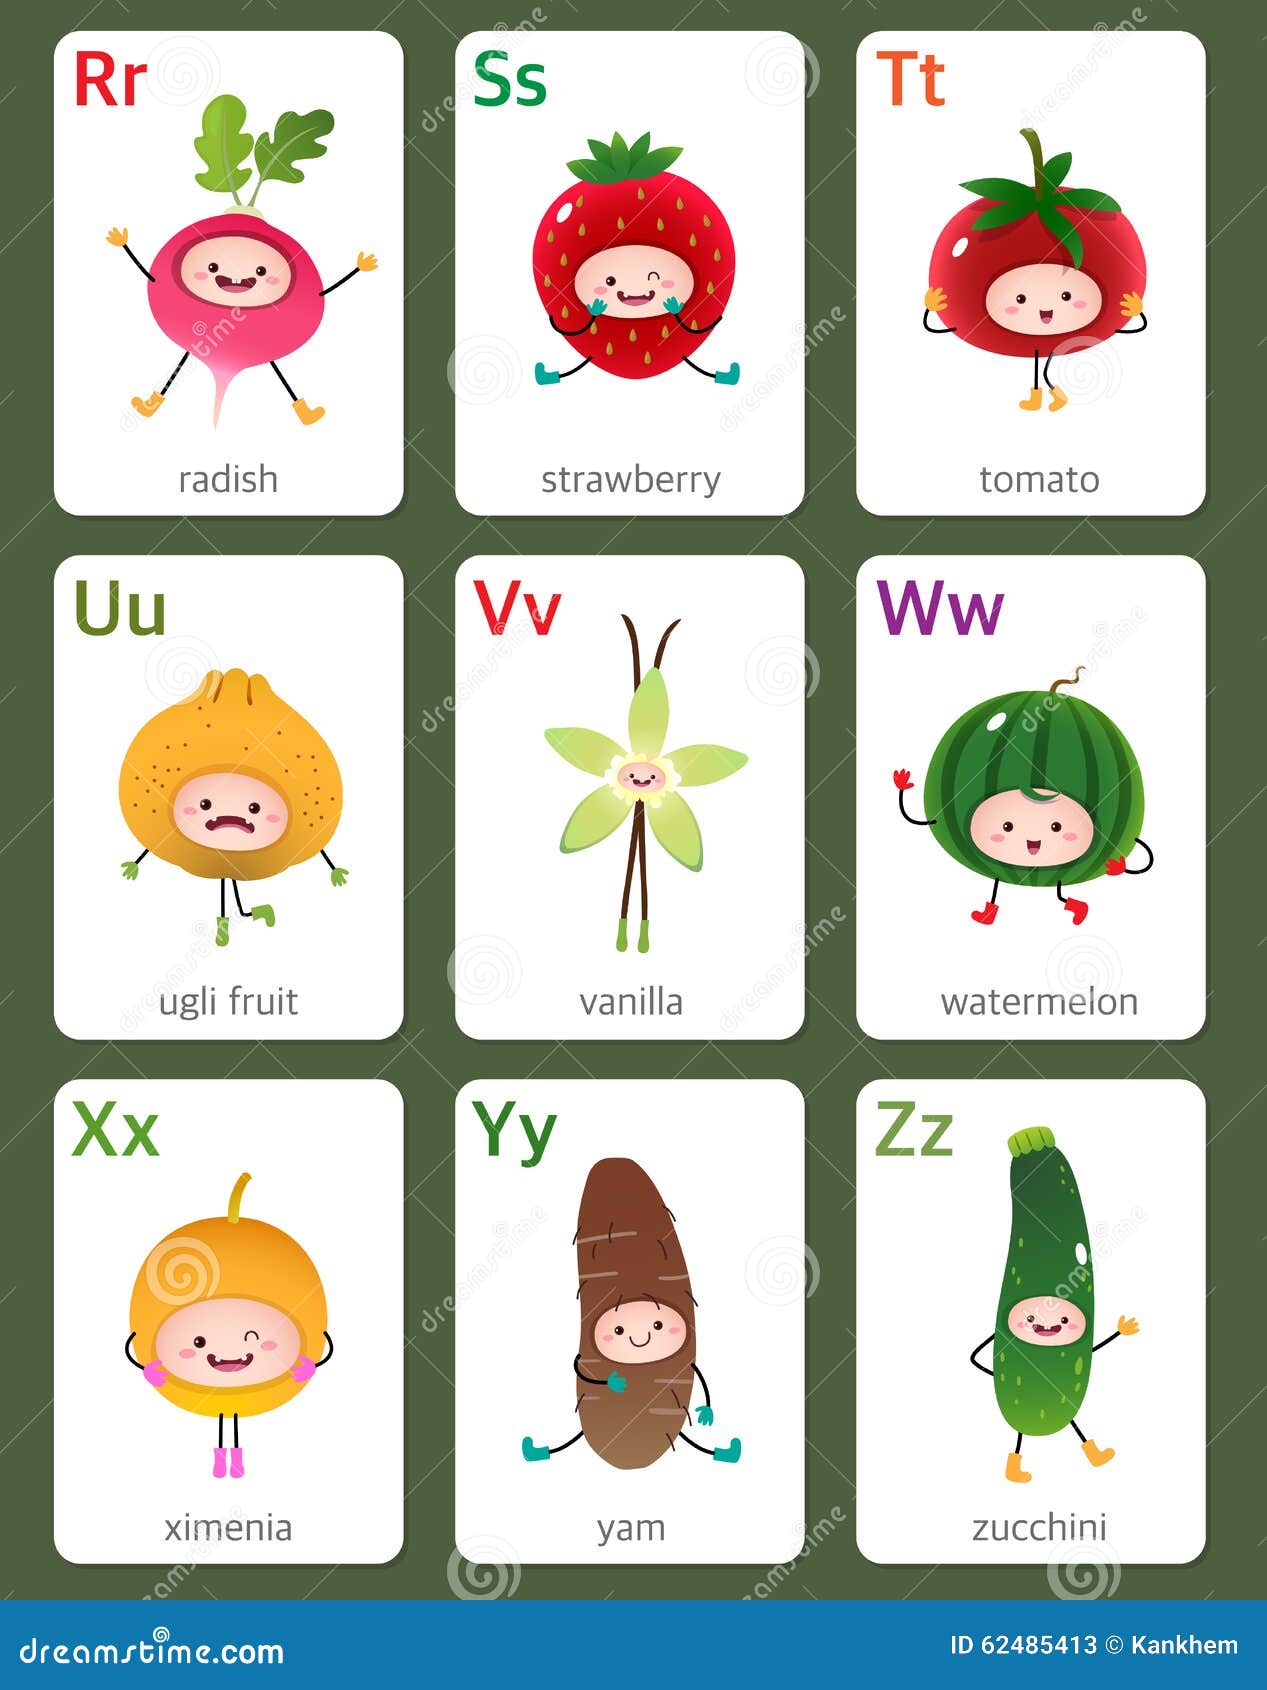 printable flashcard english alphabet from r to z with fruits and